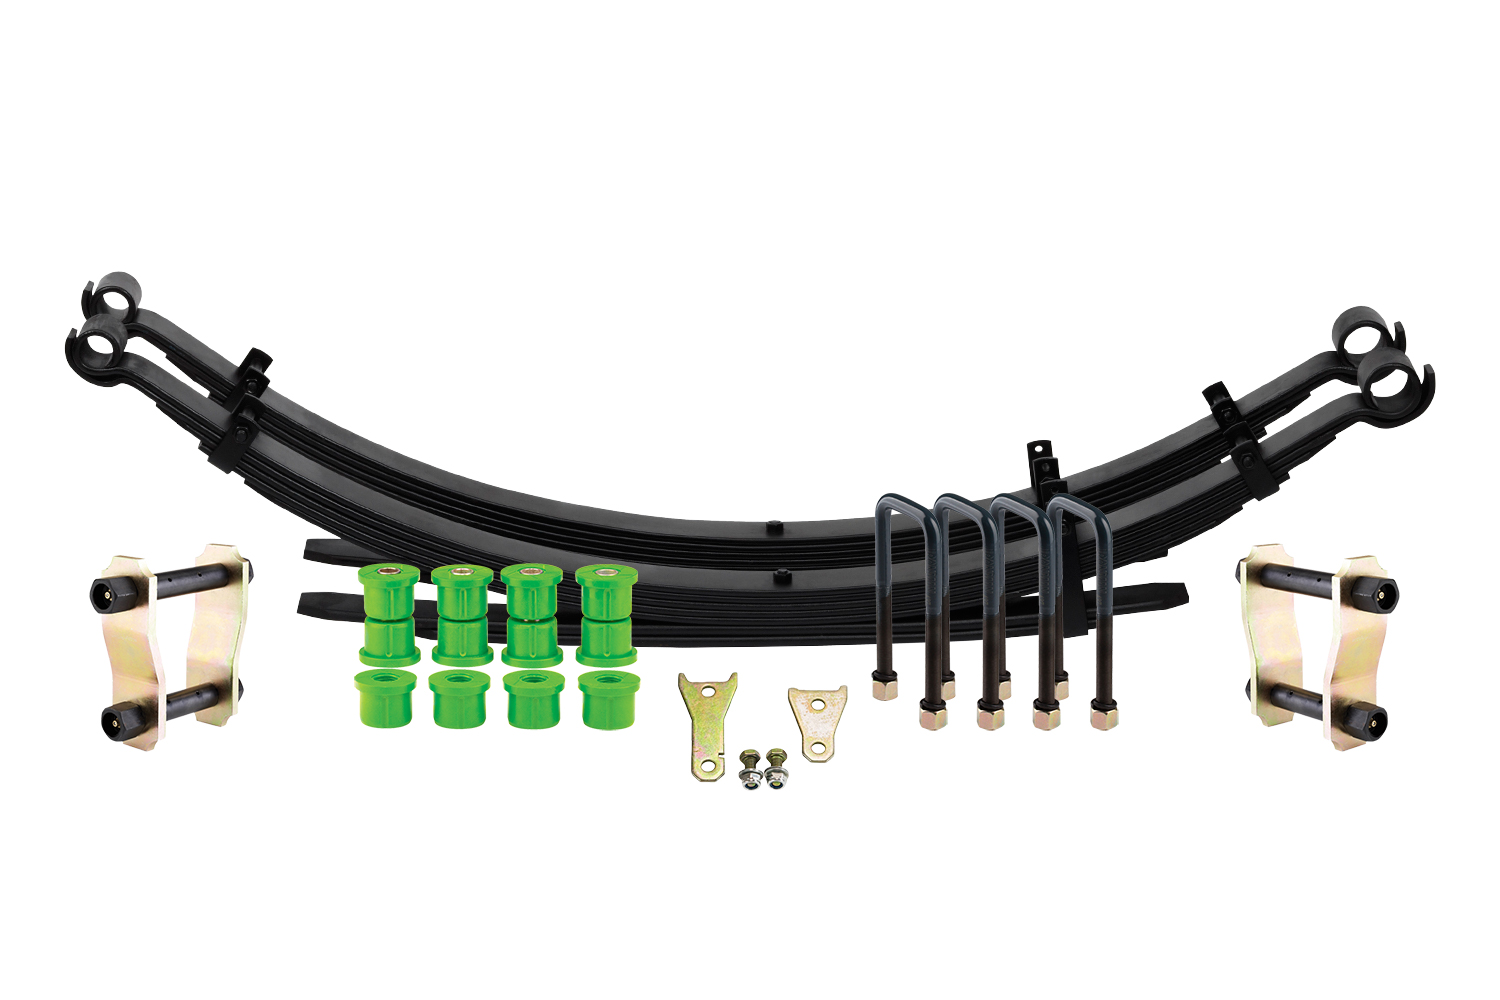 Is there a front and rear, and/or right and left for the leaf springs?